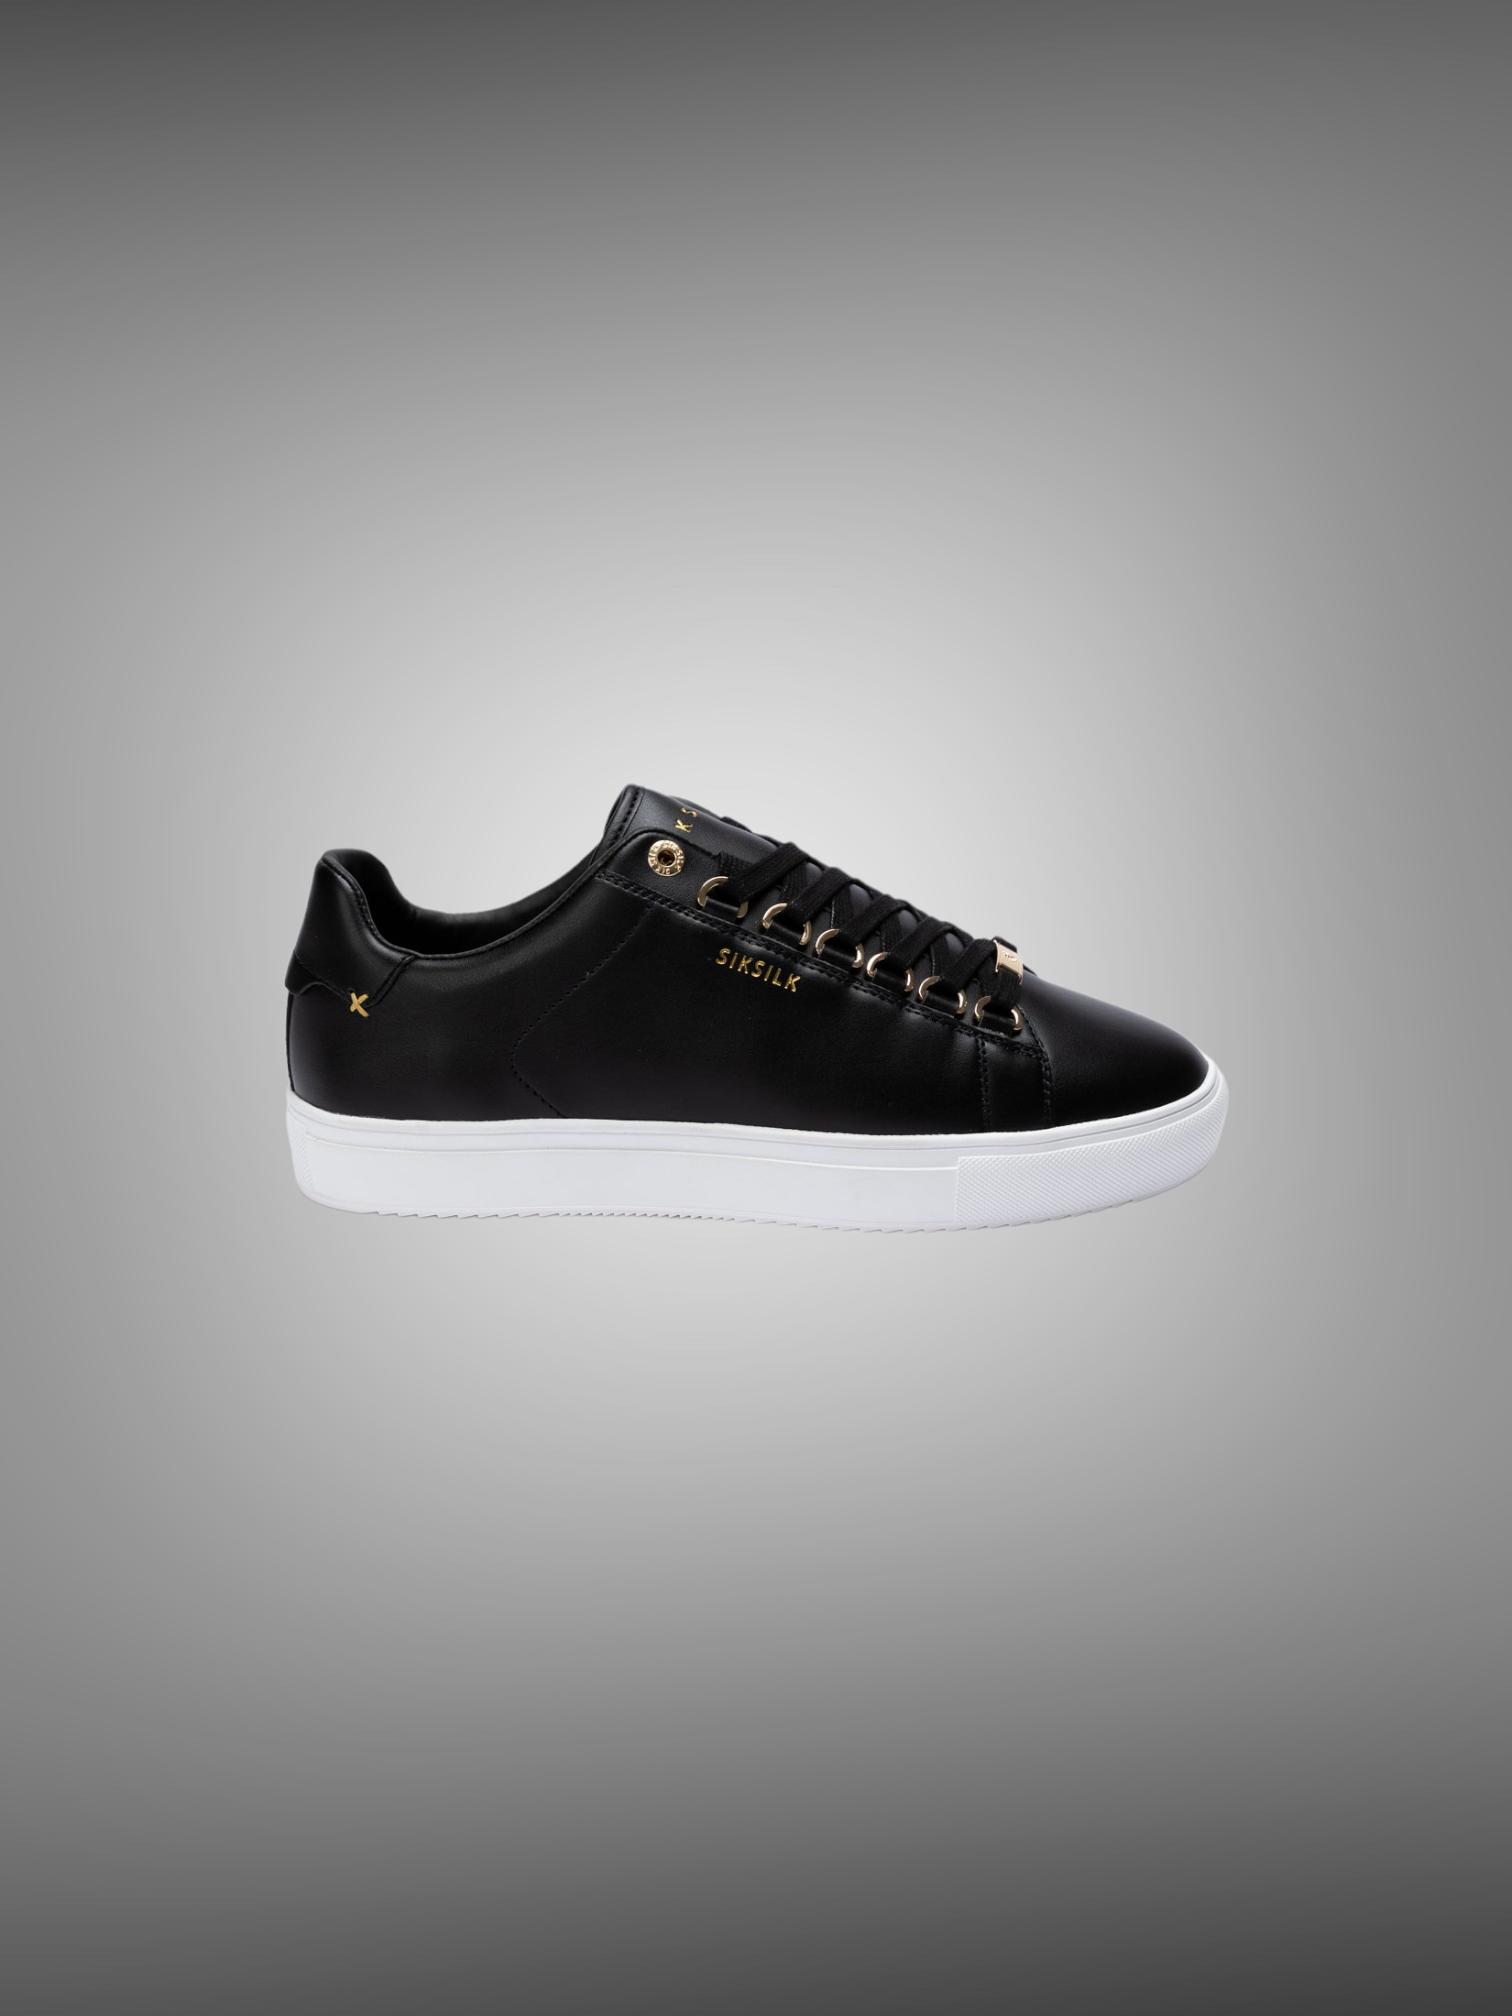 SikSilk - Black Classic Trainer With Metal D-Rings - Stayin